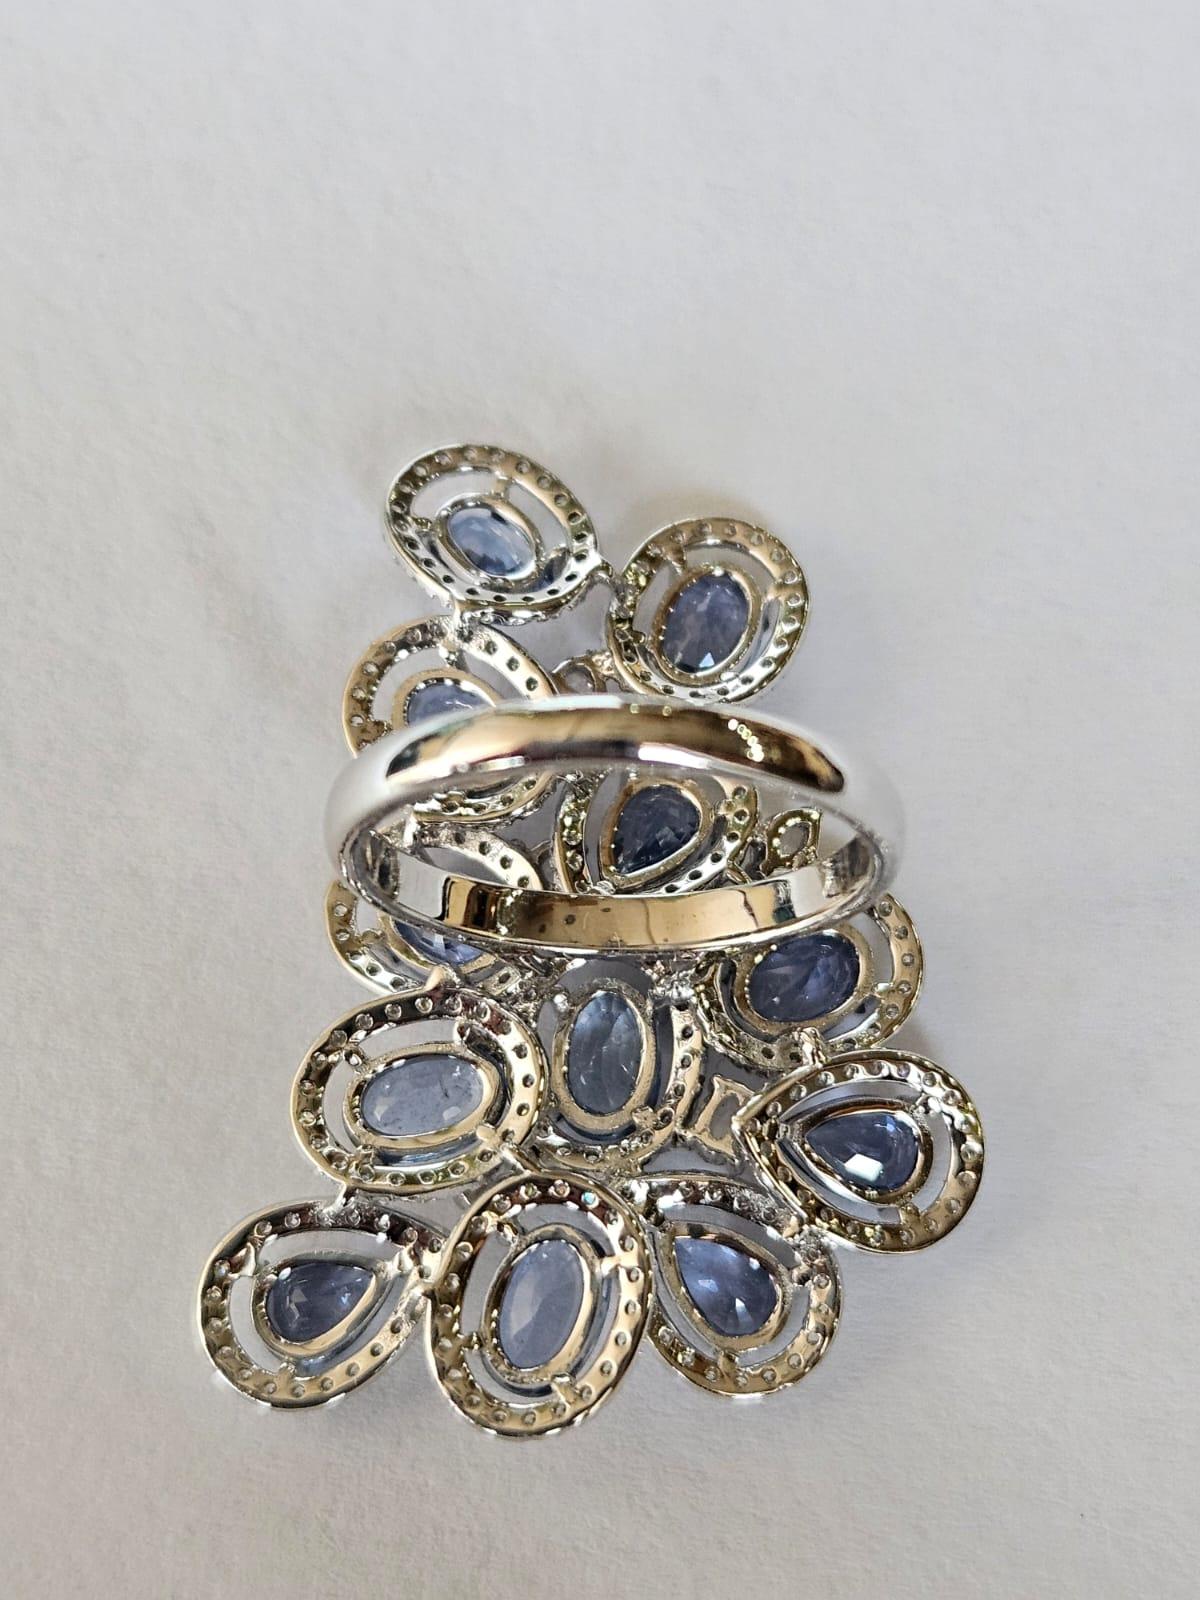 Modern Set in 18K Gold, 6.79 carats Blue Sapphires & Rose Cut Diamonds Cocktail Ring For Sale